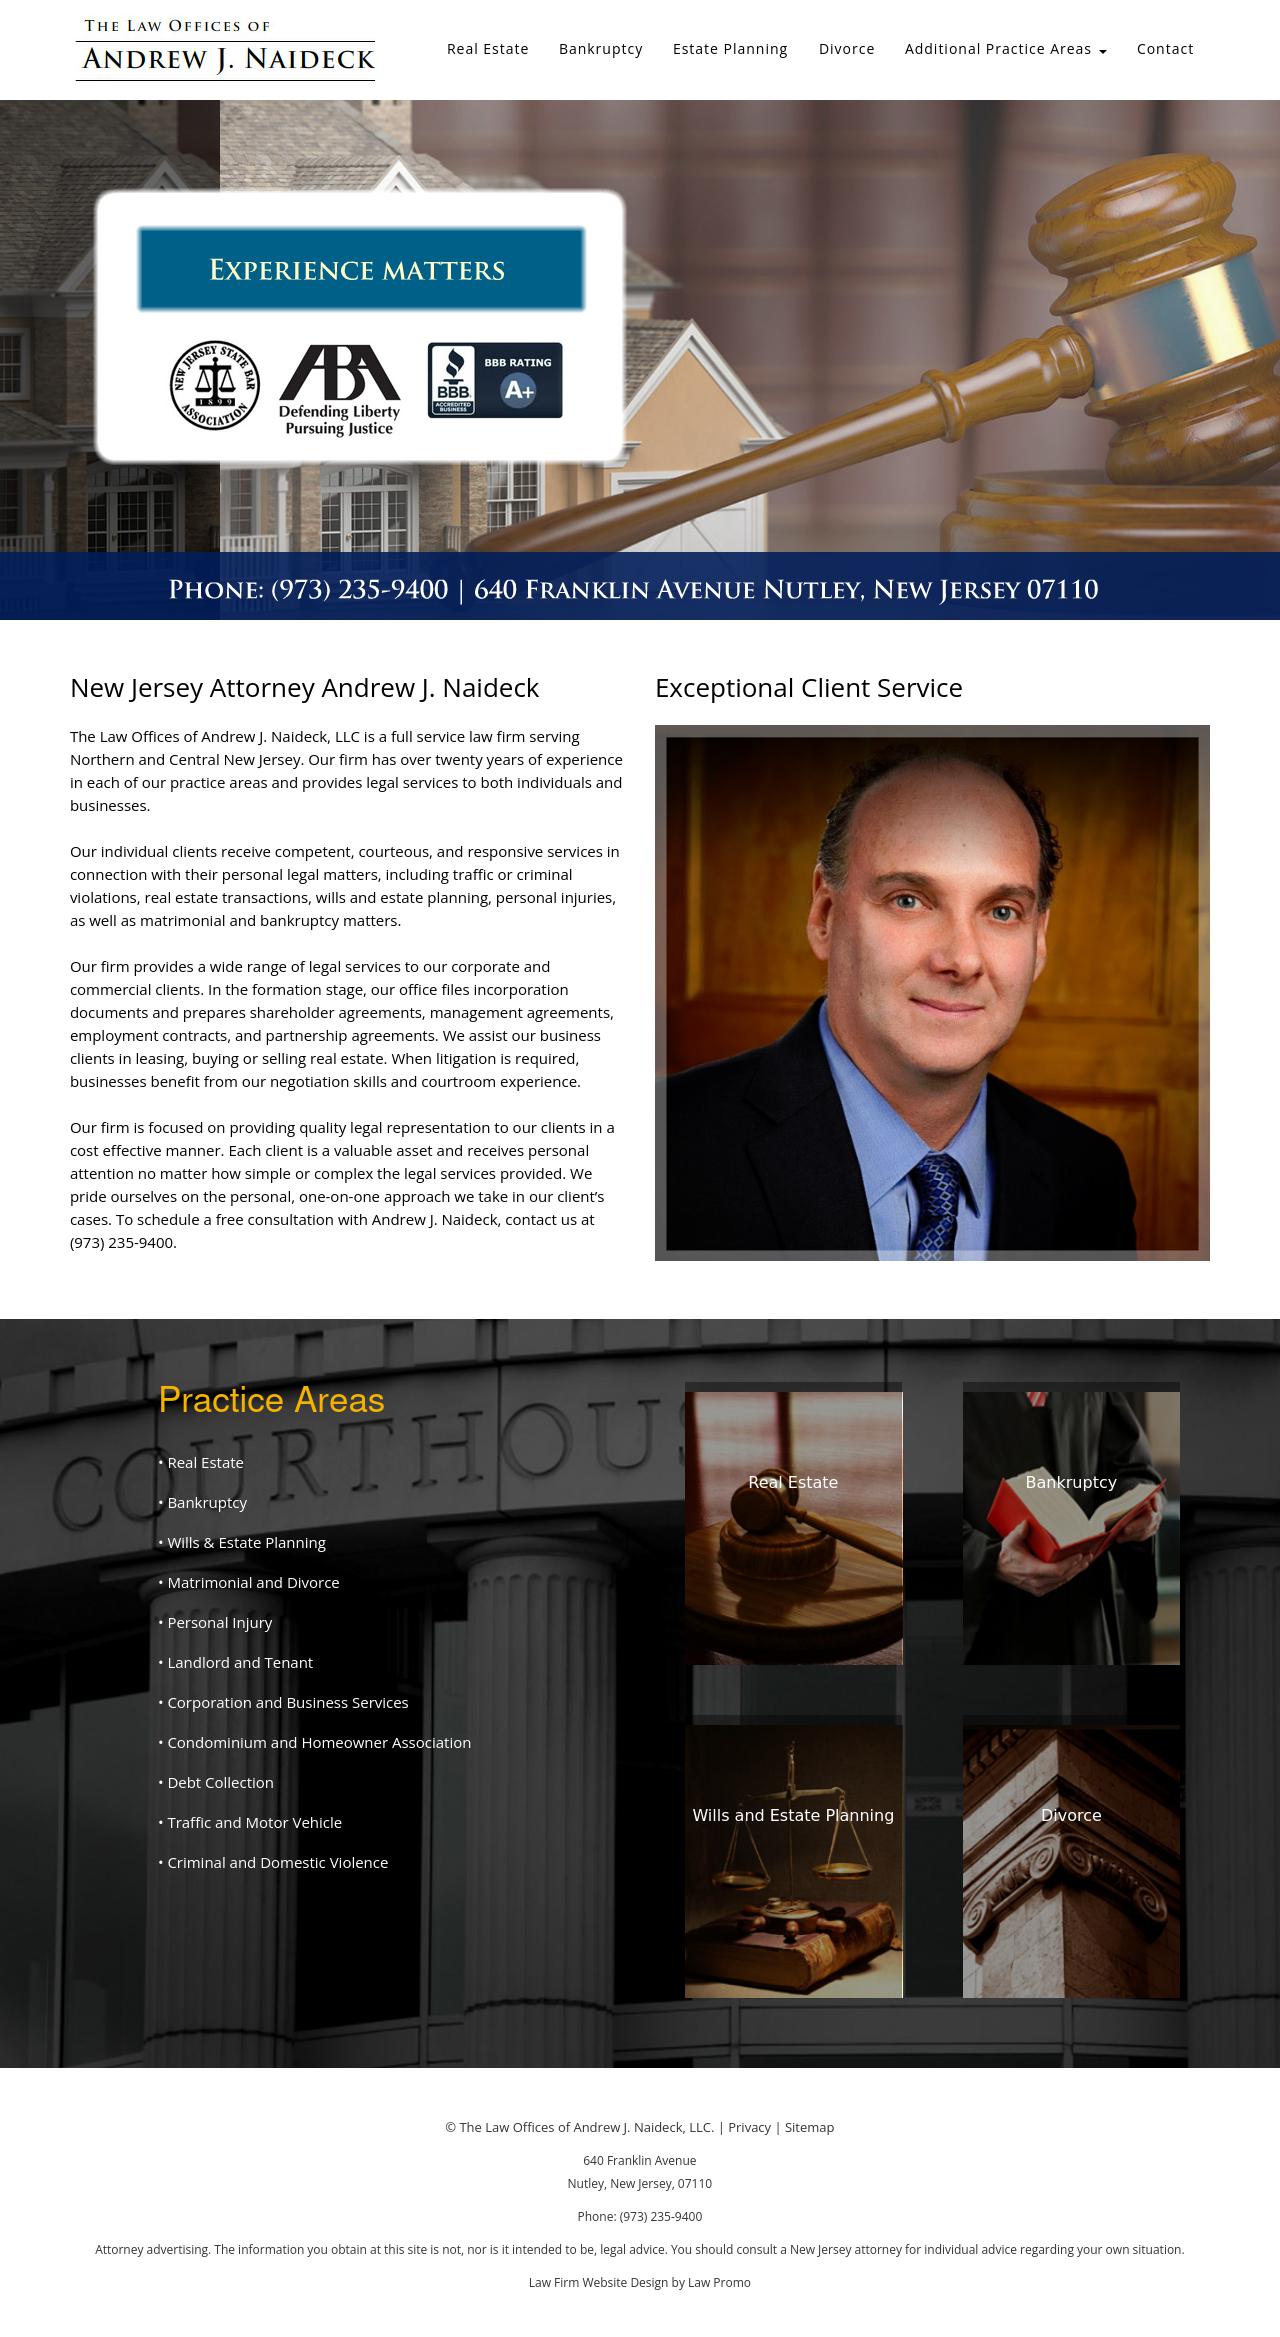 Law Offices of Andrew J. Naideck - Nutley NJ Lawyers